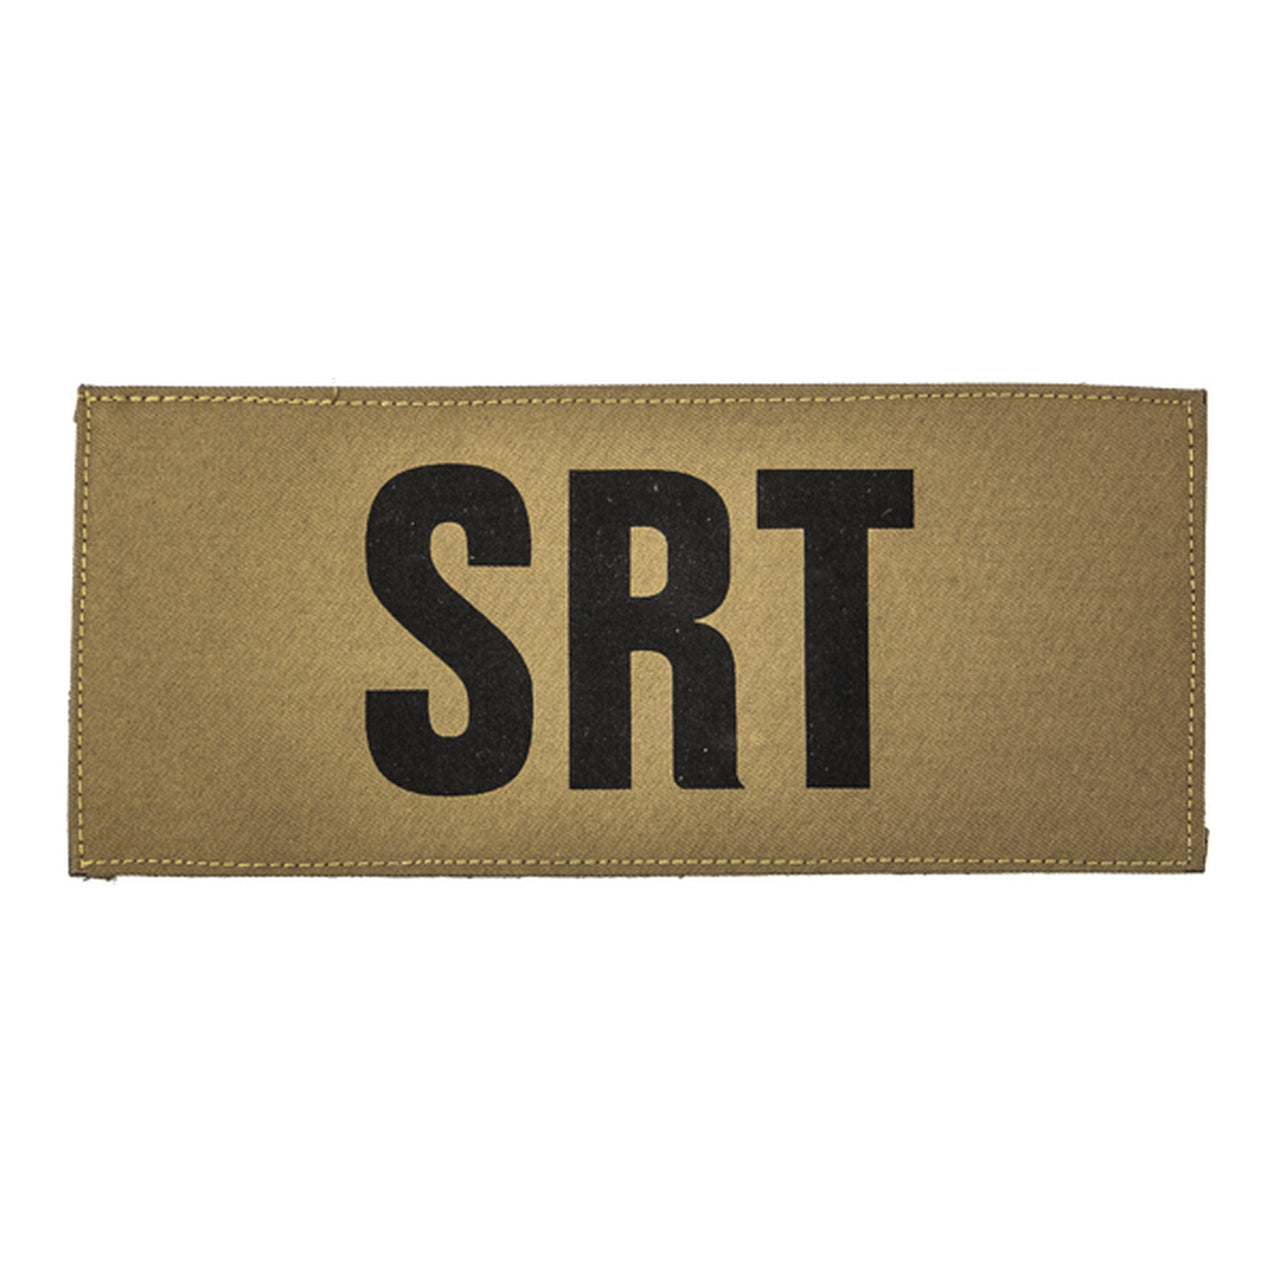 SHELLBACK TACTICAL 2 X 5 INCH ID PLACARD WITH HOOK BACK